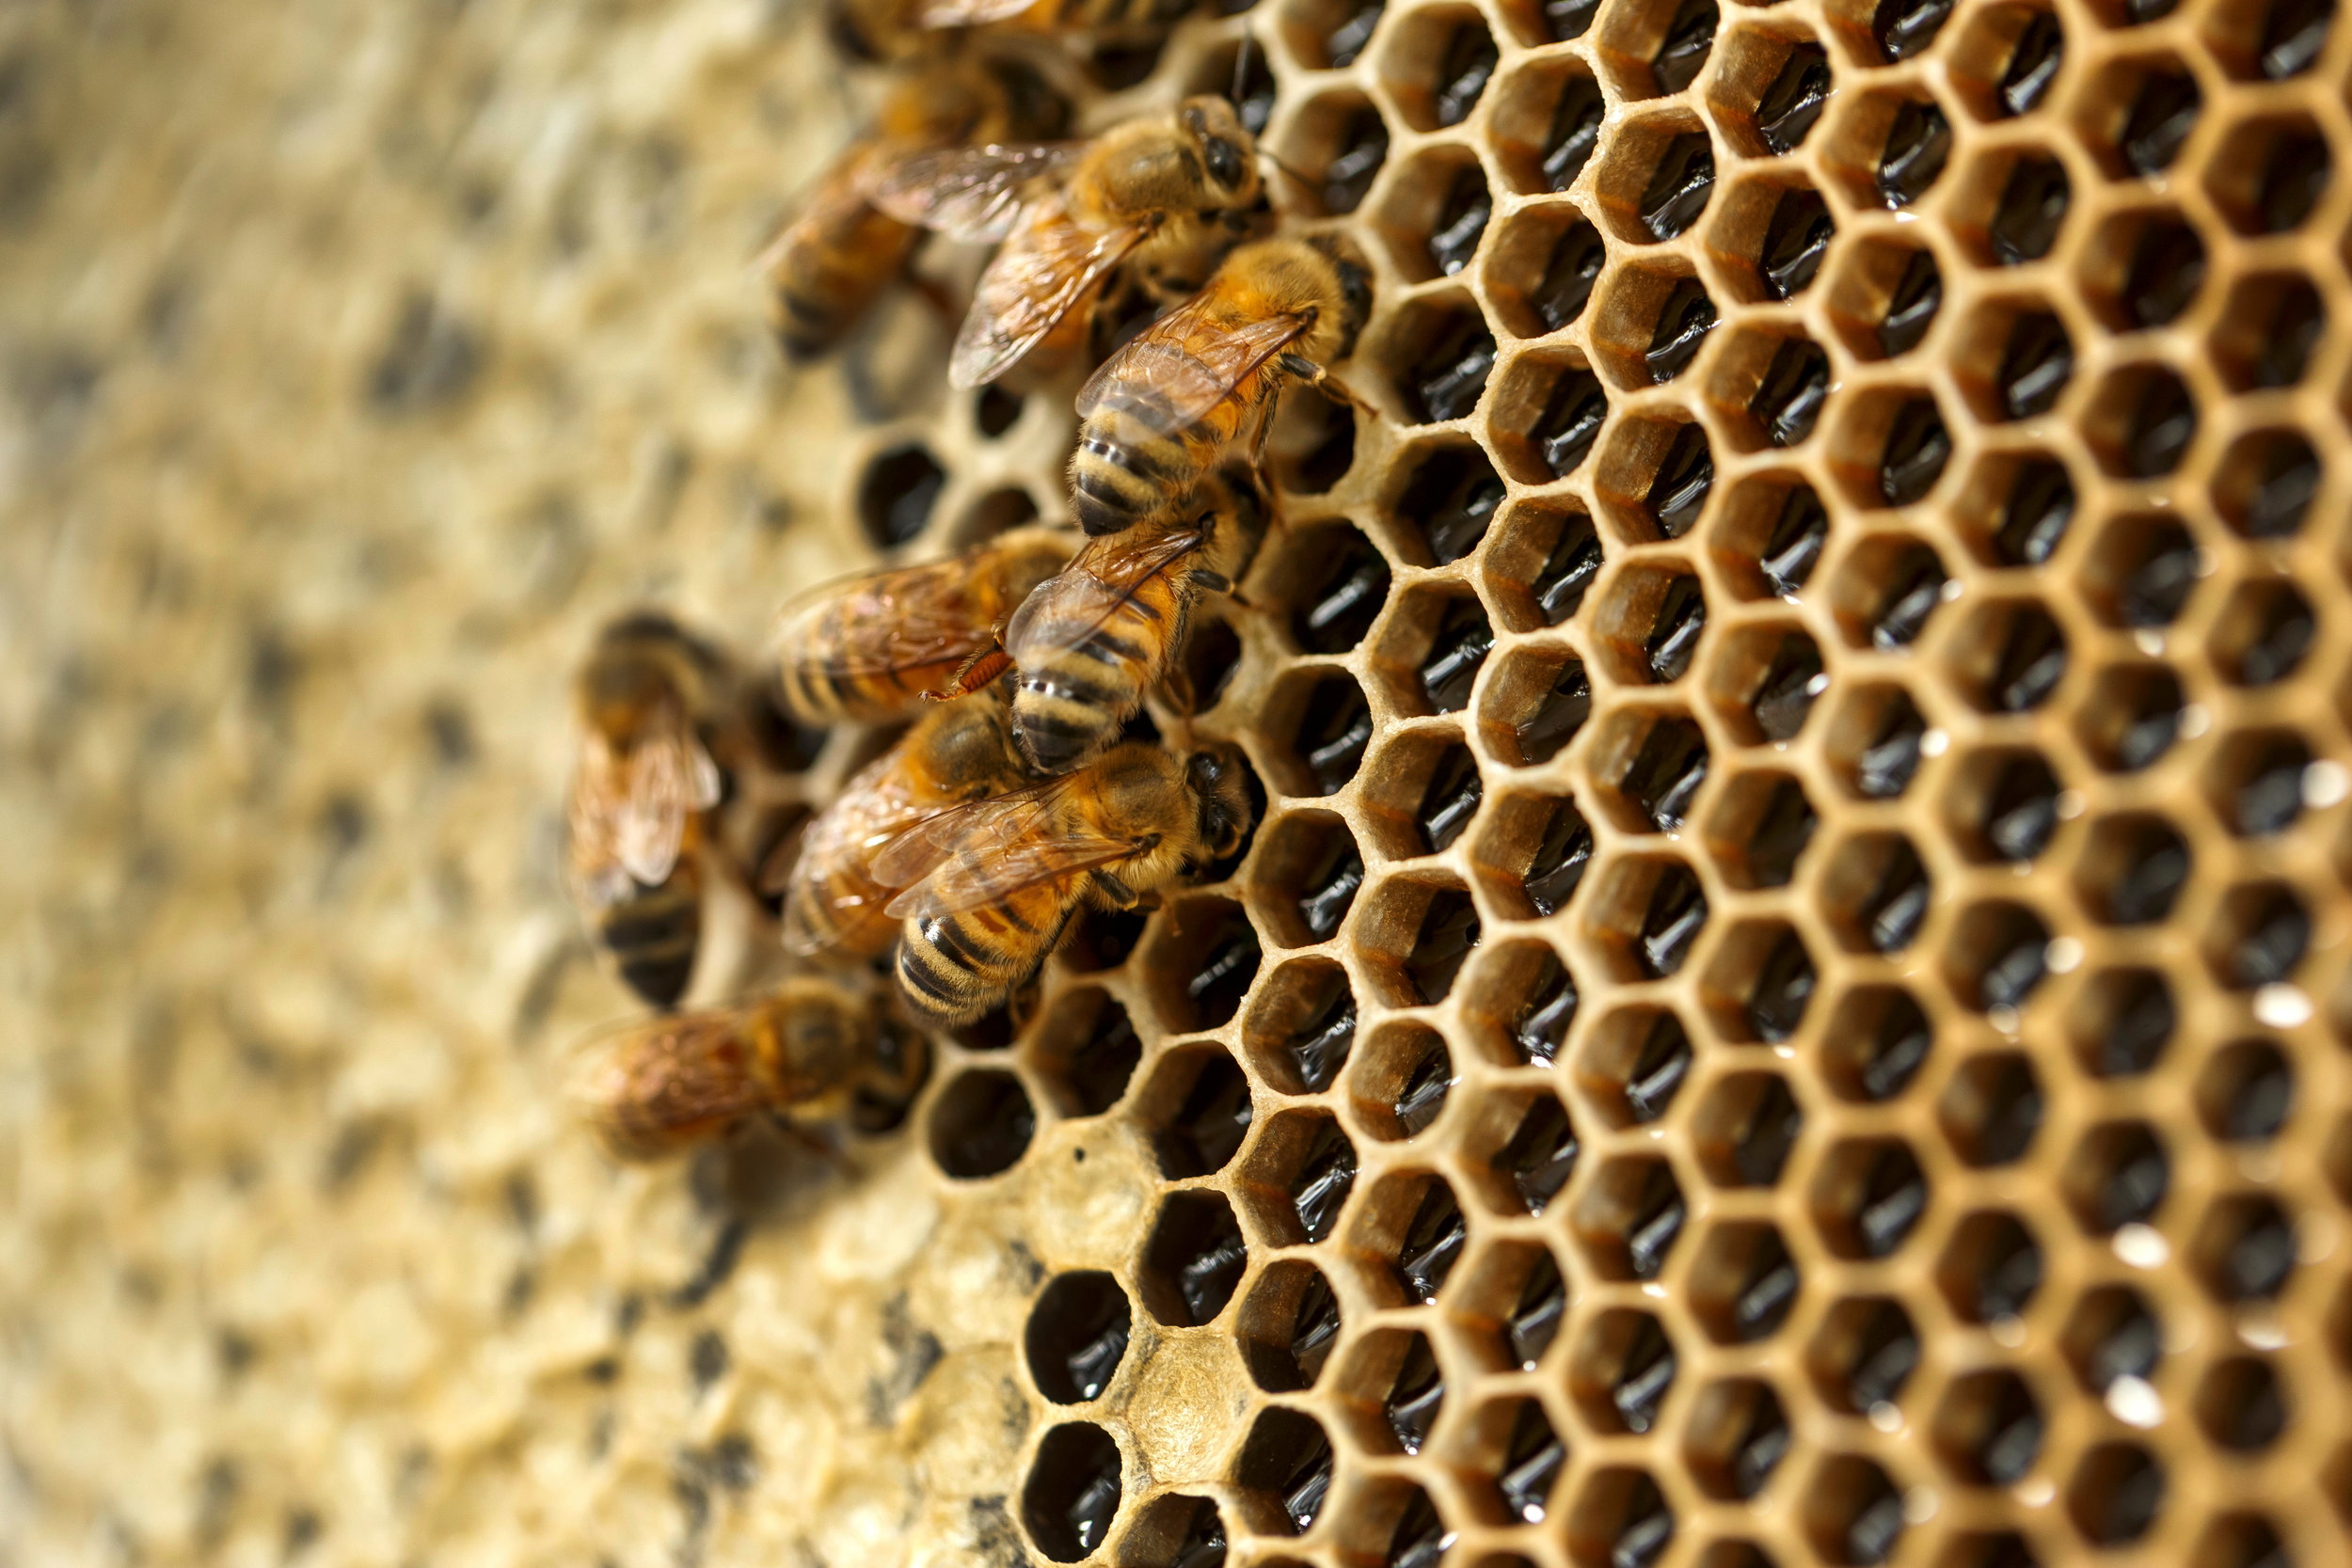  Learn about beekeeping in an urban setting with Bee One Third, Neighbourhood Honey as part of the forthcoming Parks Alive program at Roma Street Parklands. 